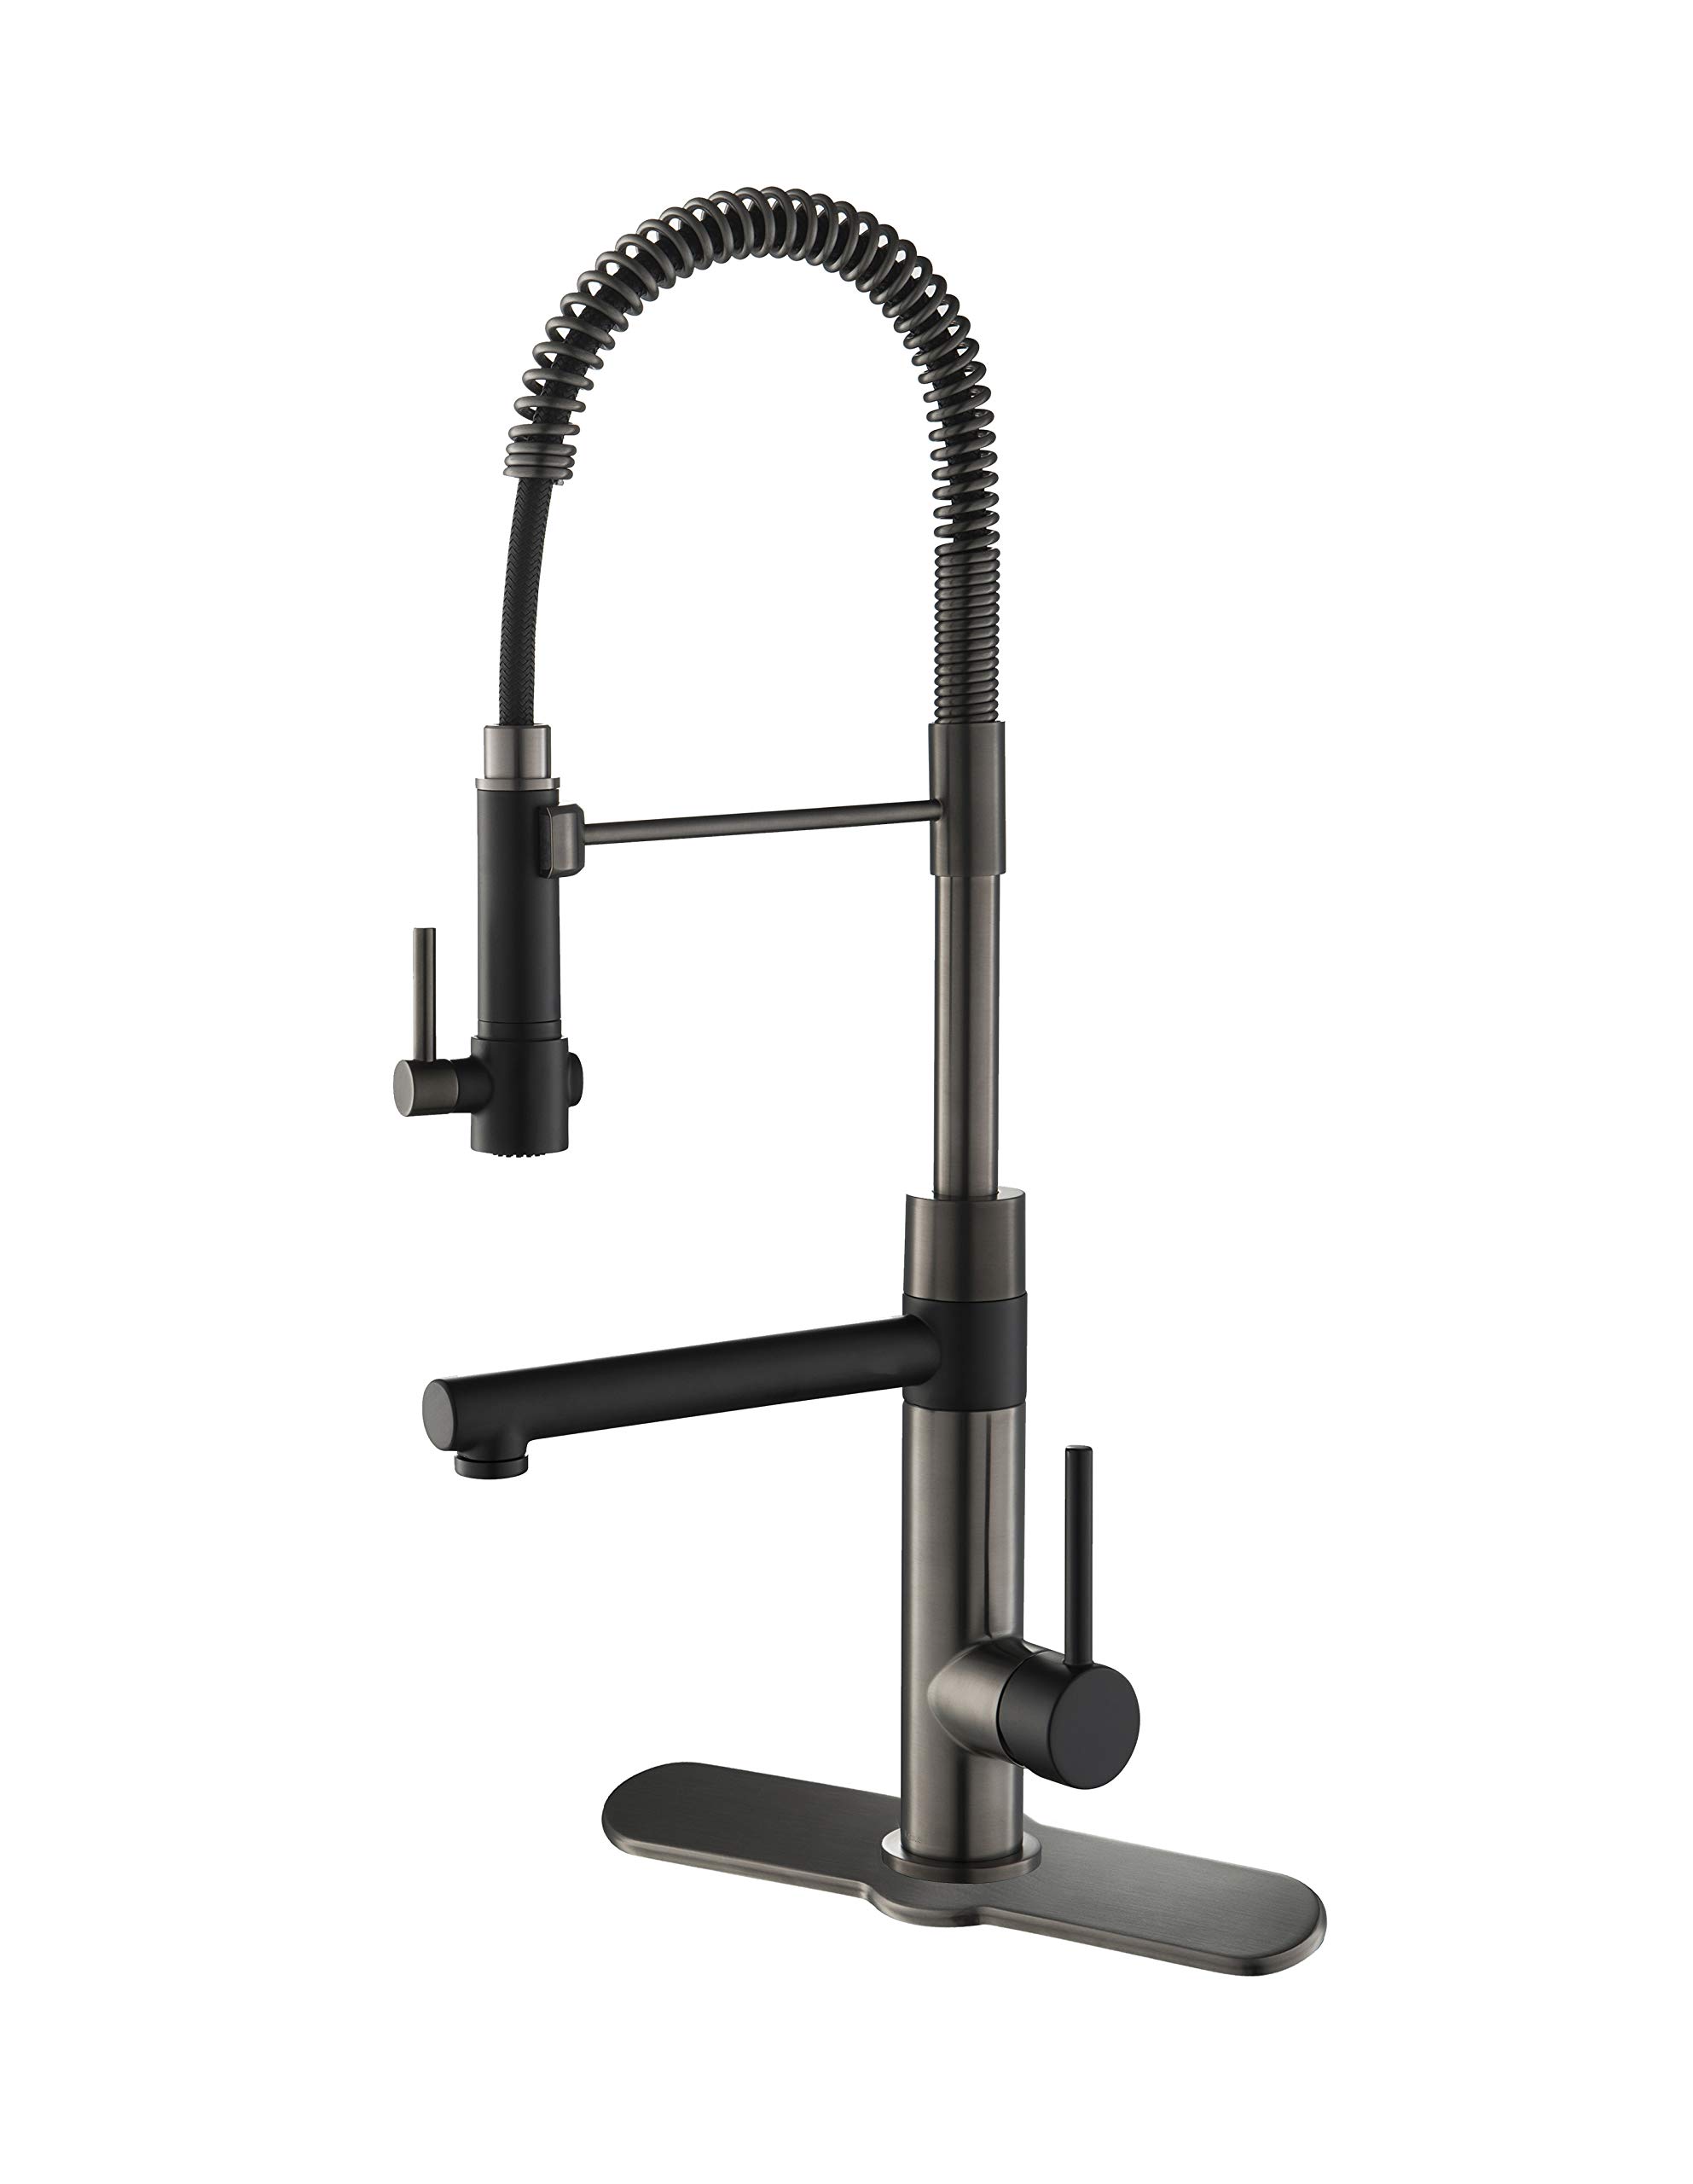 Kraus KPF-1603MBSB Artec Pro 2-Function Commercial Style Pre-Rinse Kitchen Faucet with Pull-Down Spring Spout and Pot Filler, Matte Black/Black Stainless Steel